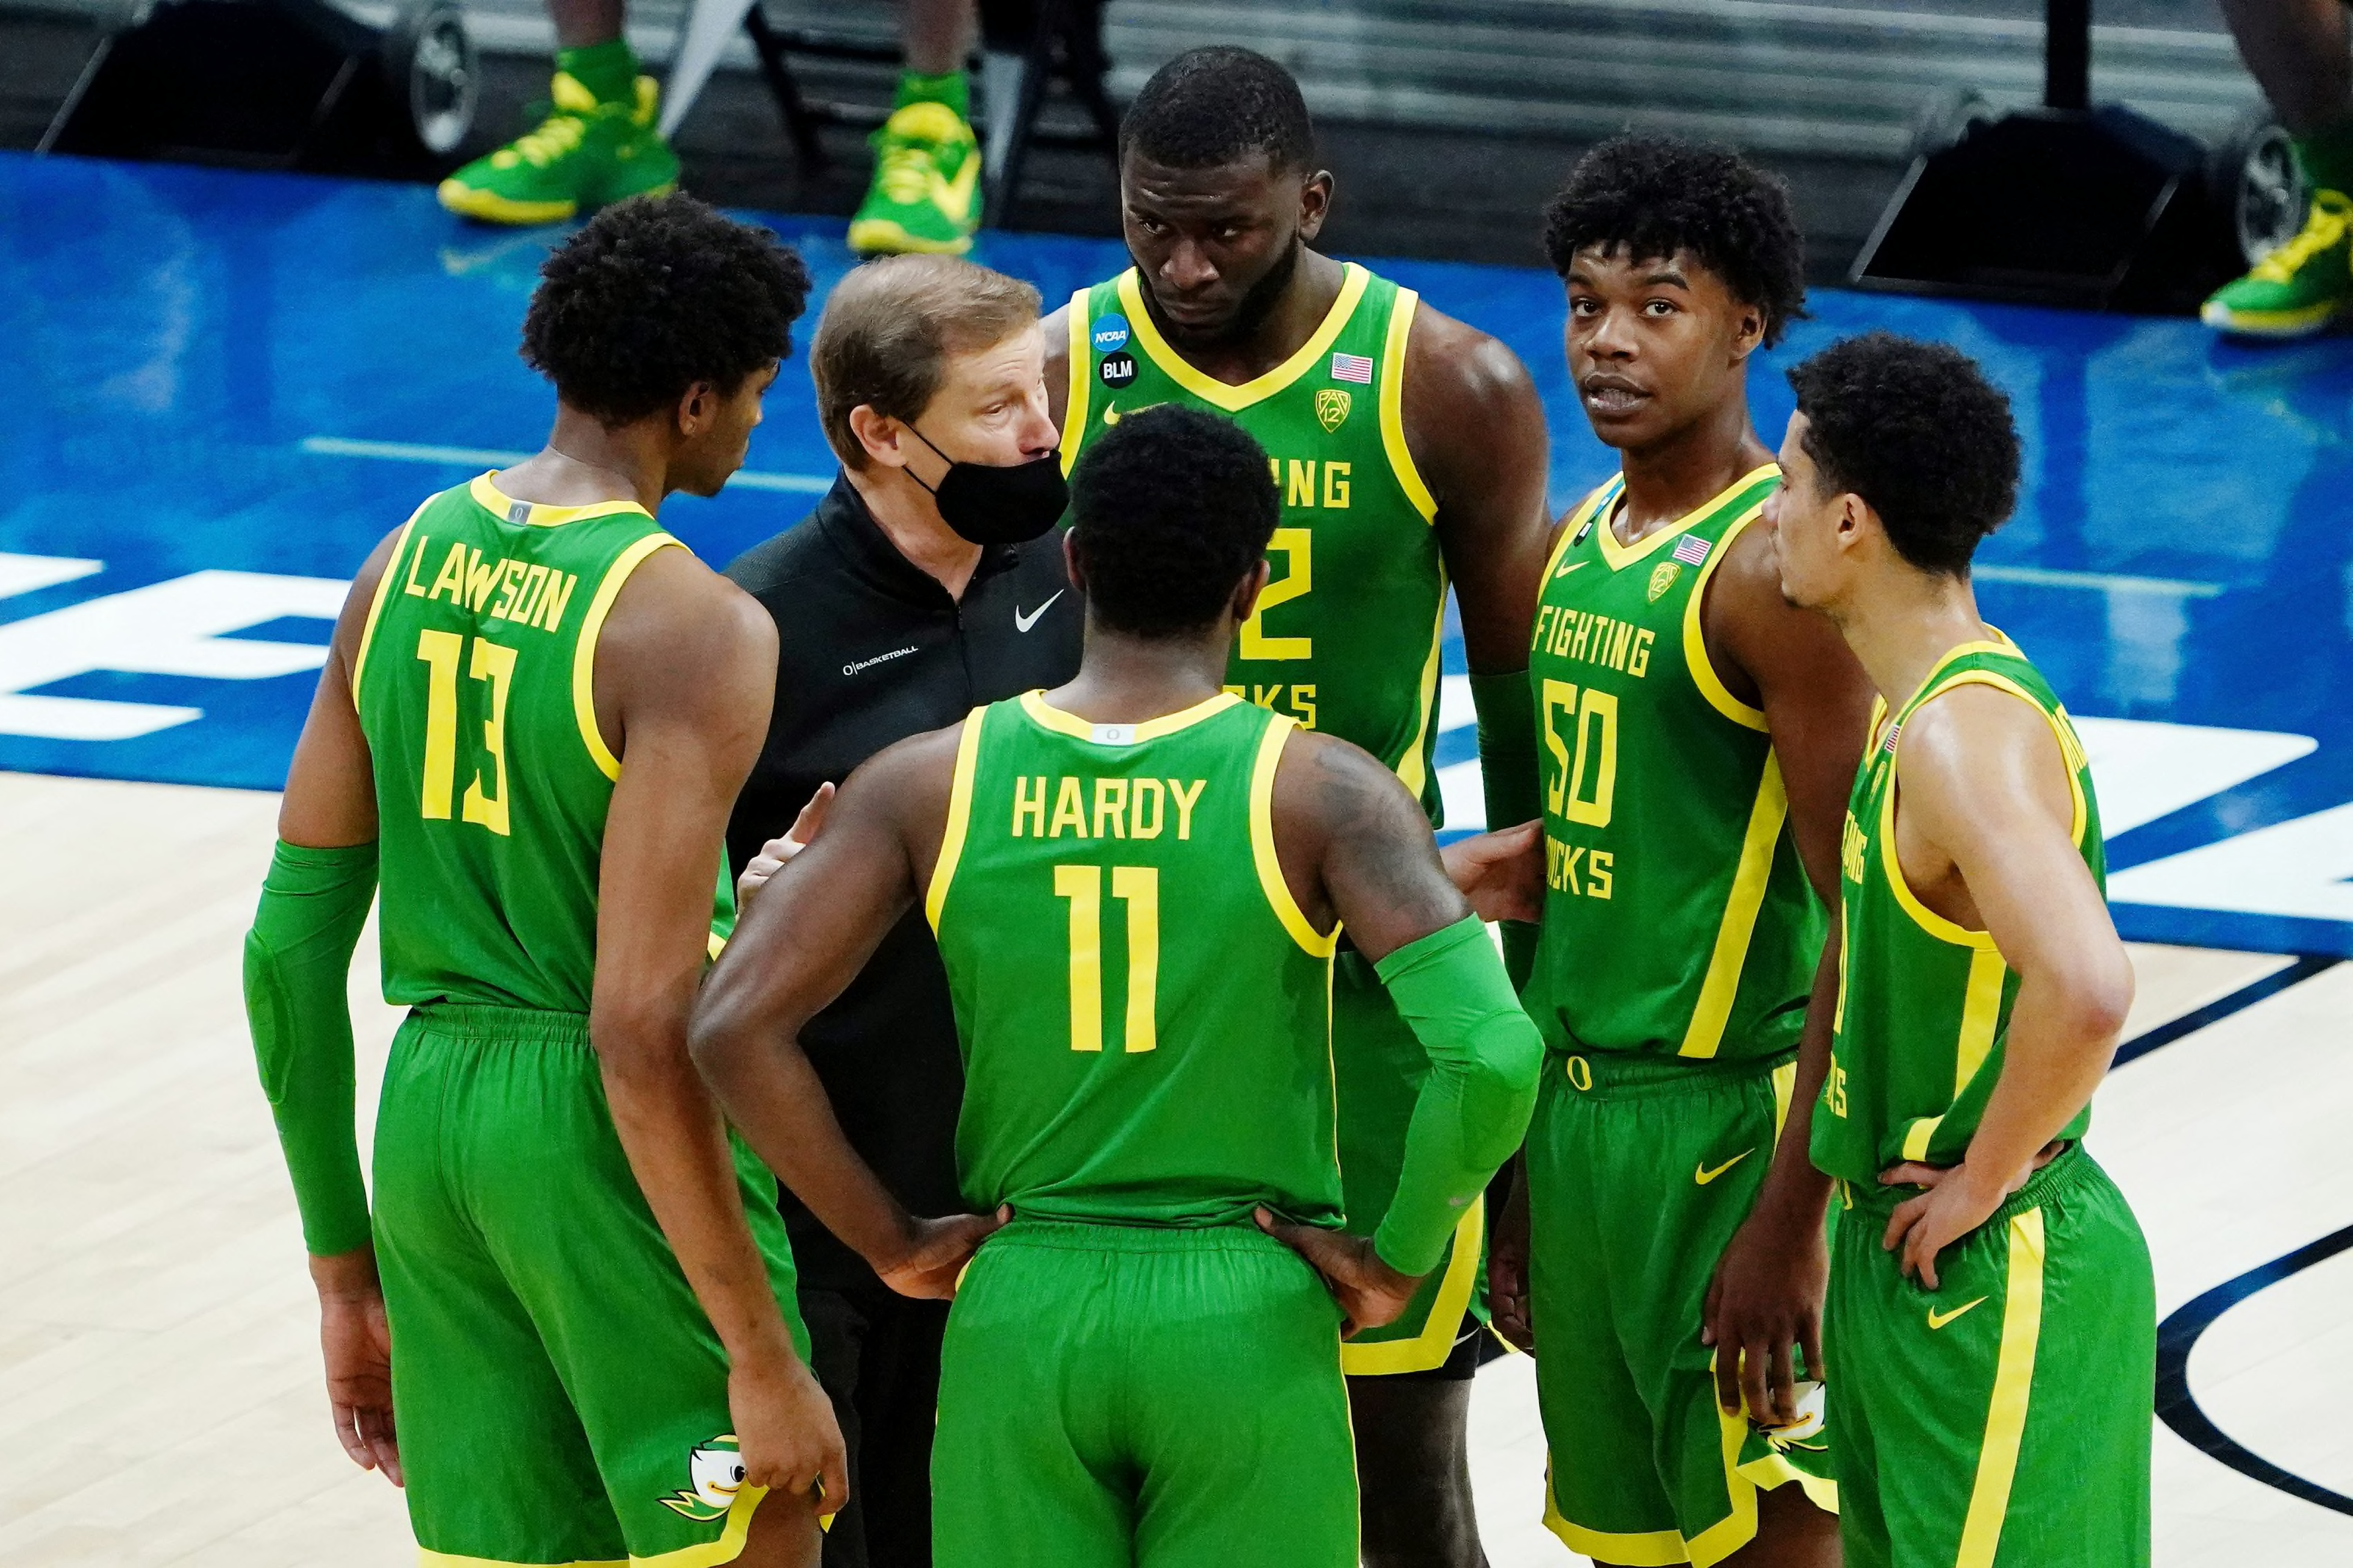 Oregon Basketball: Projected starting lineup and depth chart for 2021-22